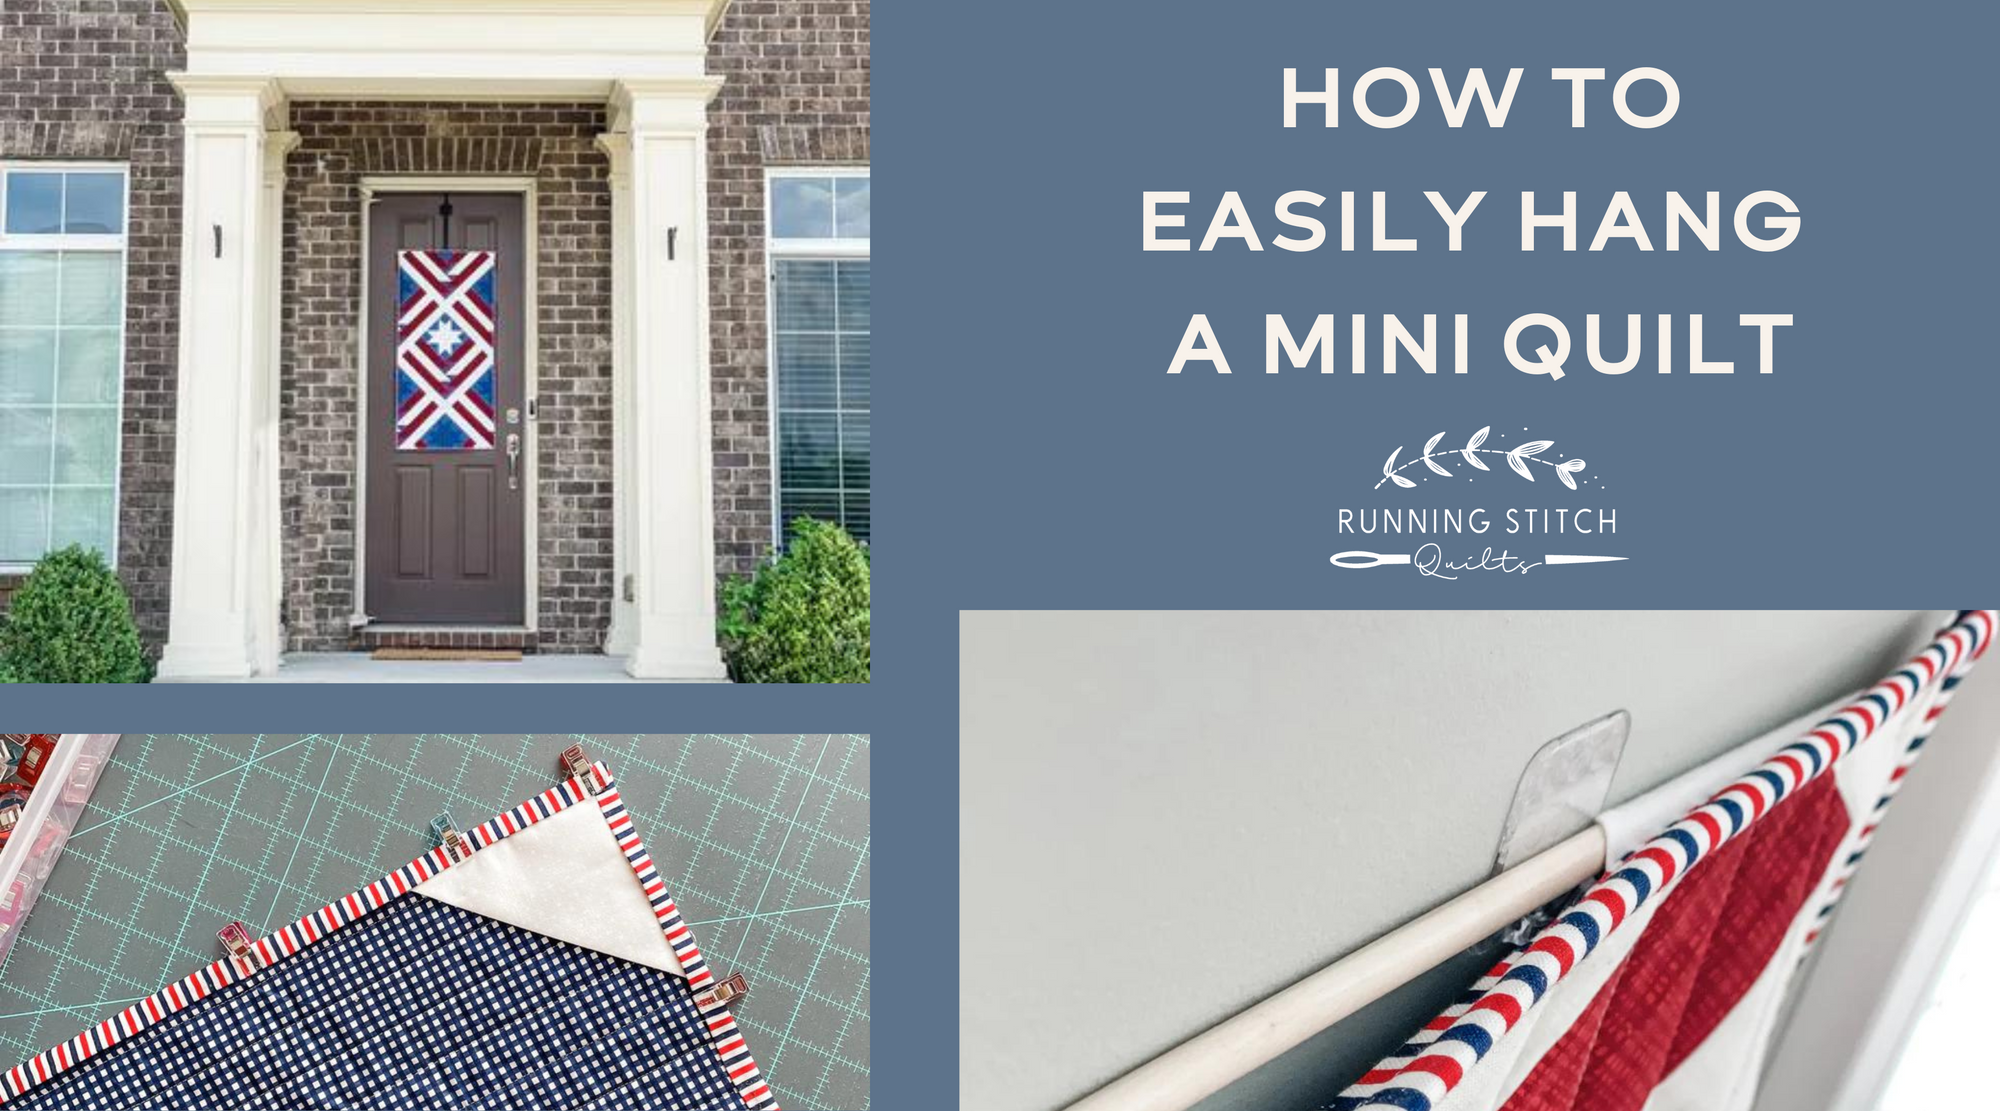 How to Easily Hang a Mini Quilt